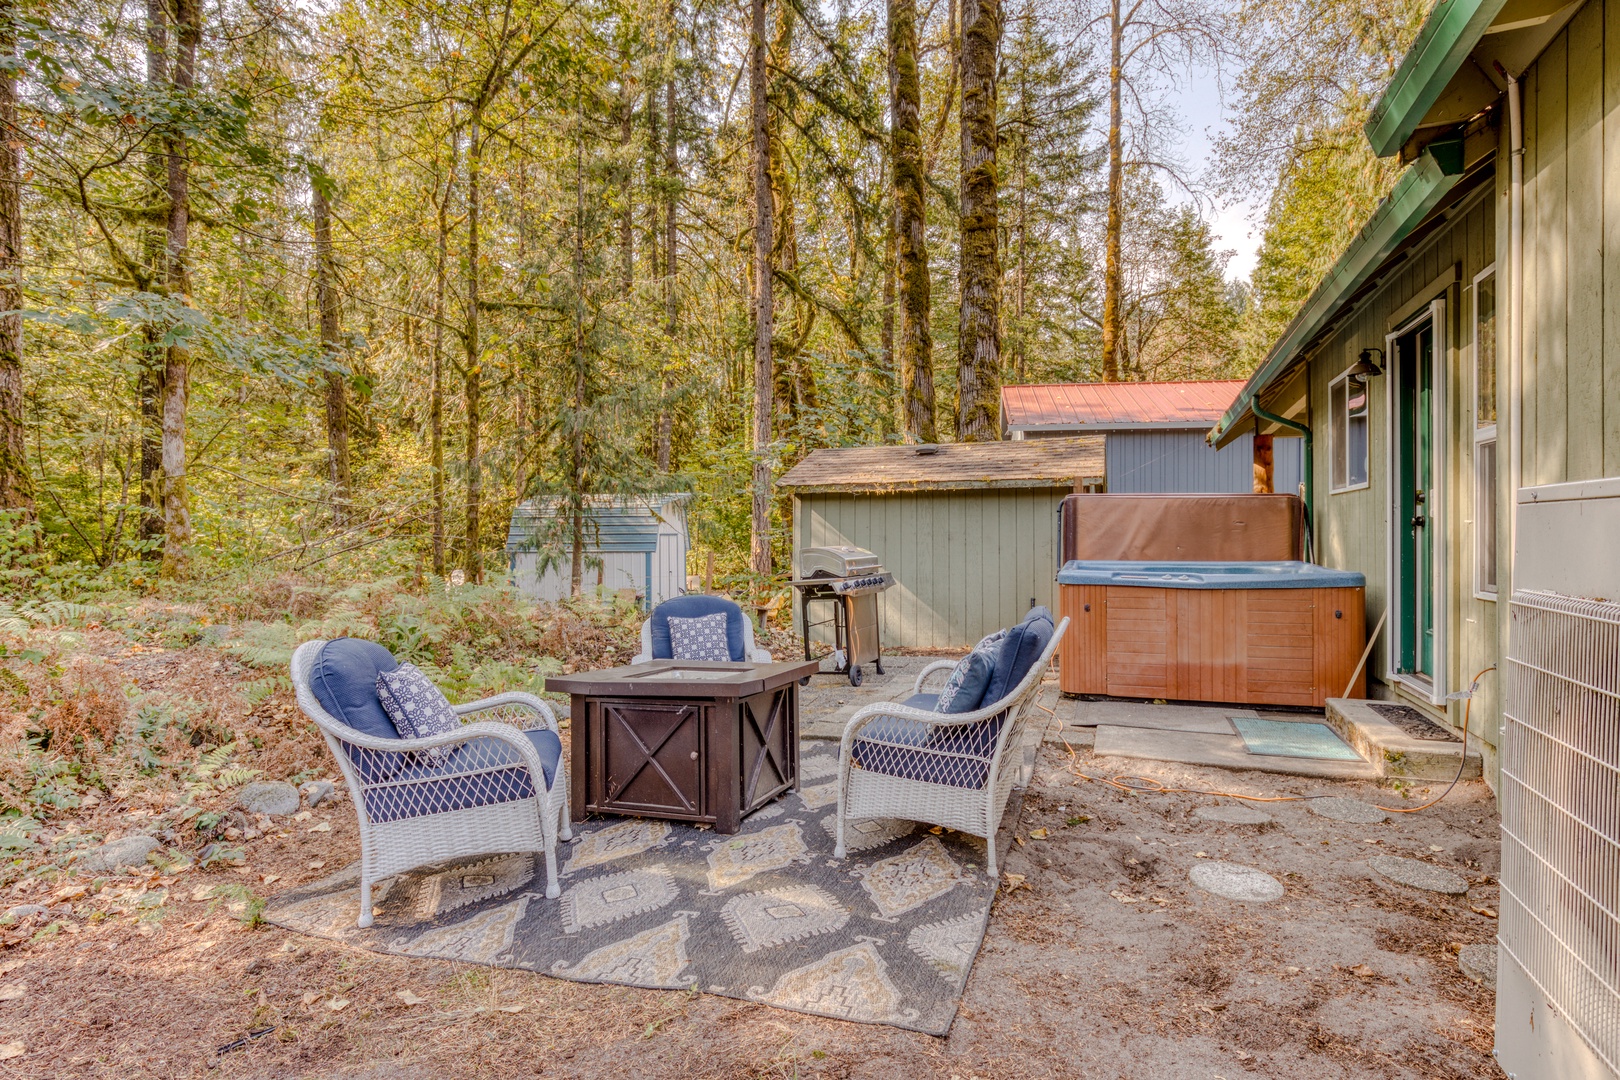 Brightwood Vacation Rentals, Riverside Retreat - Immerse yourself in the natural beauty of Mt Hood with an outdoor fire pit and private hot tub